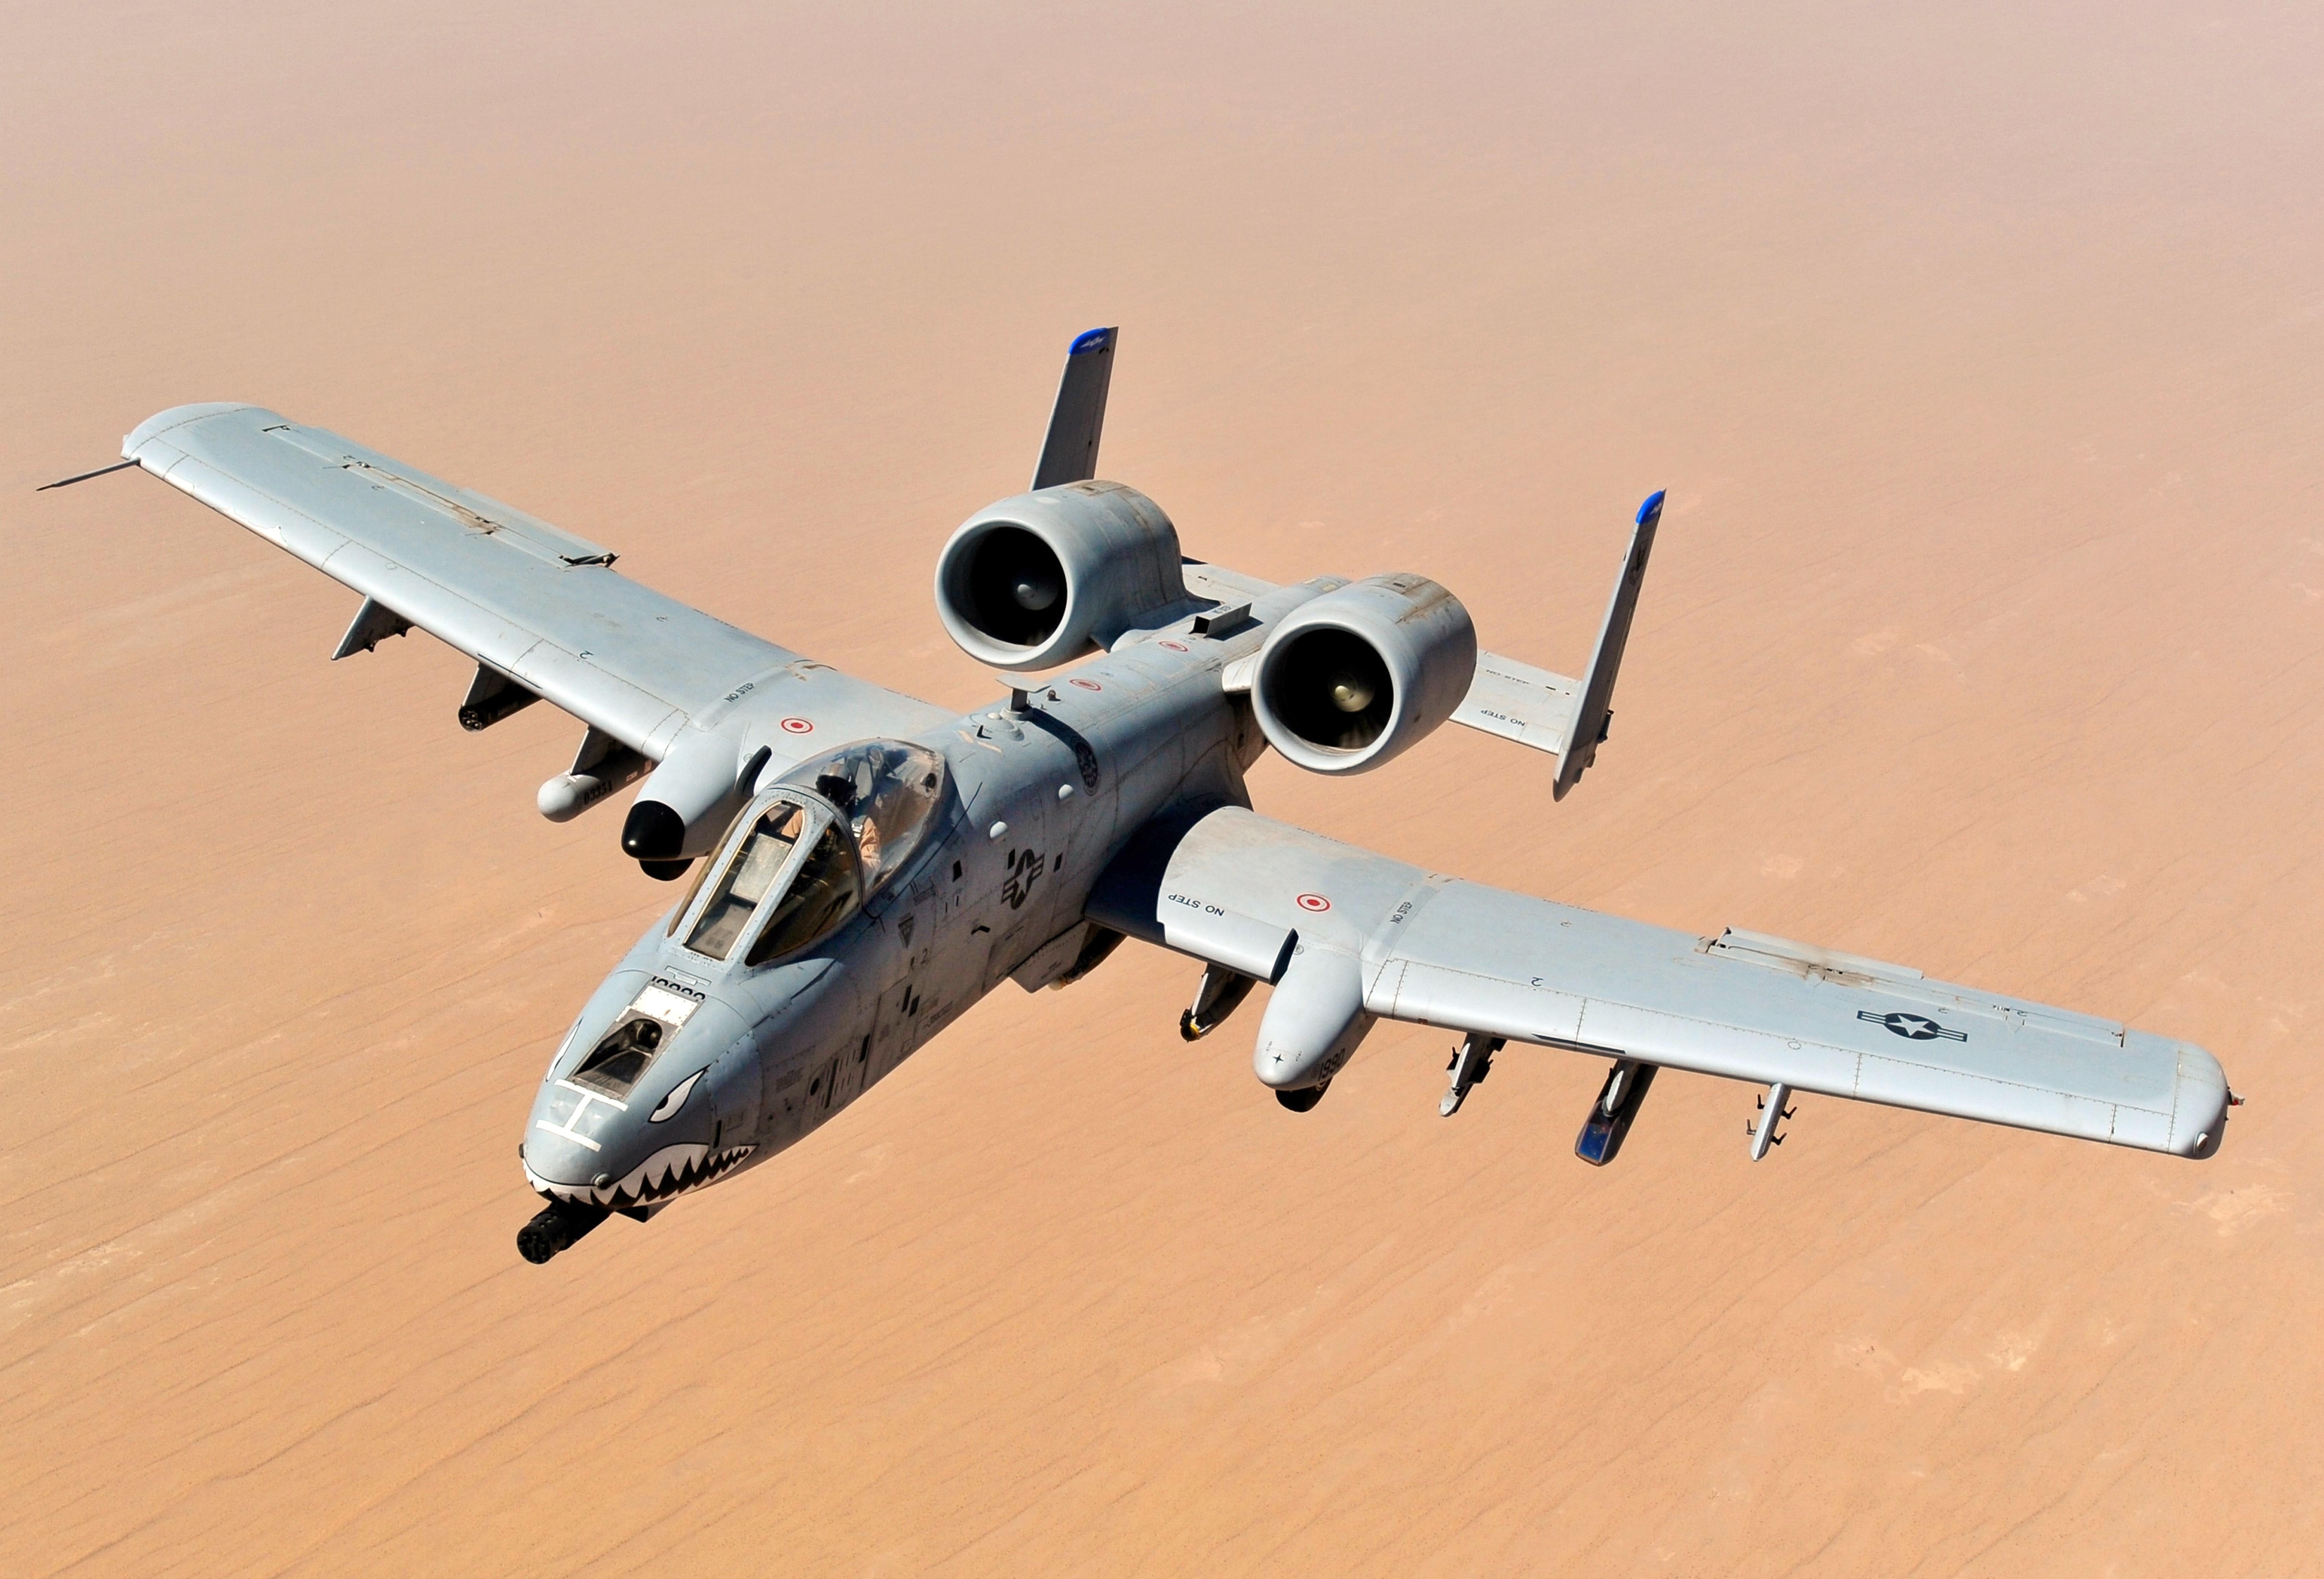 A 10 Warthog Wallpaper 71 pictures